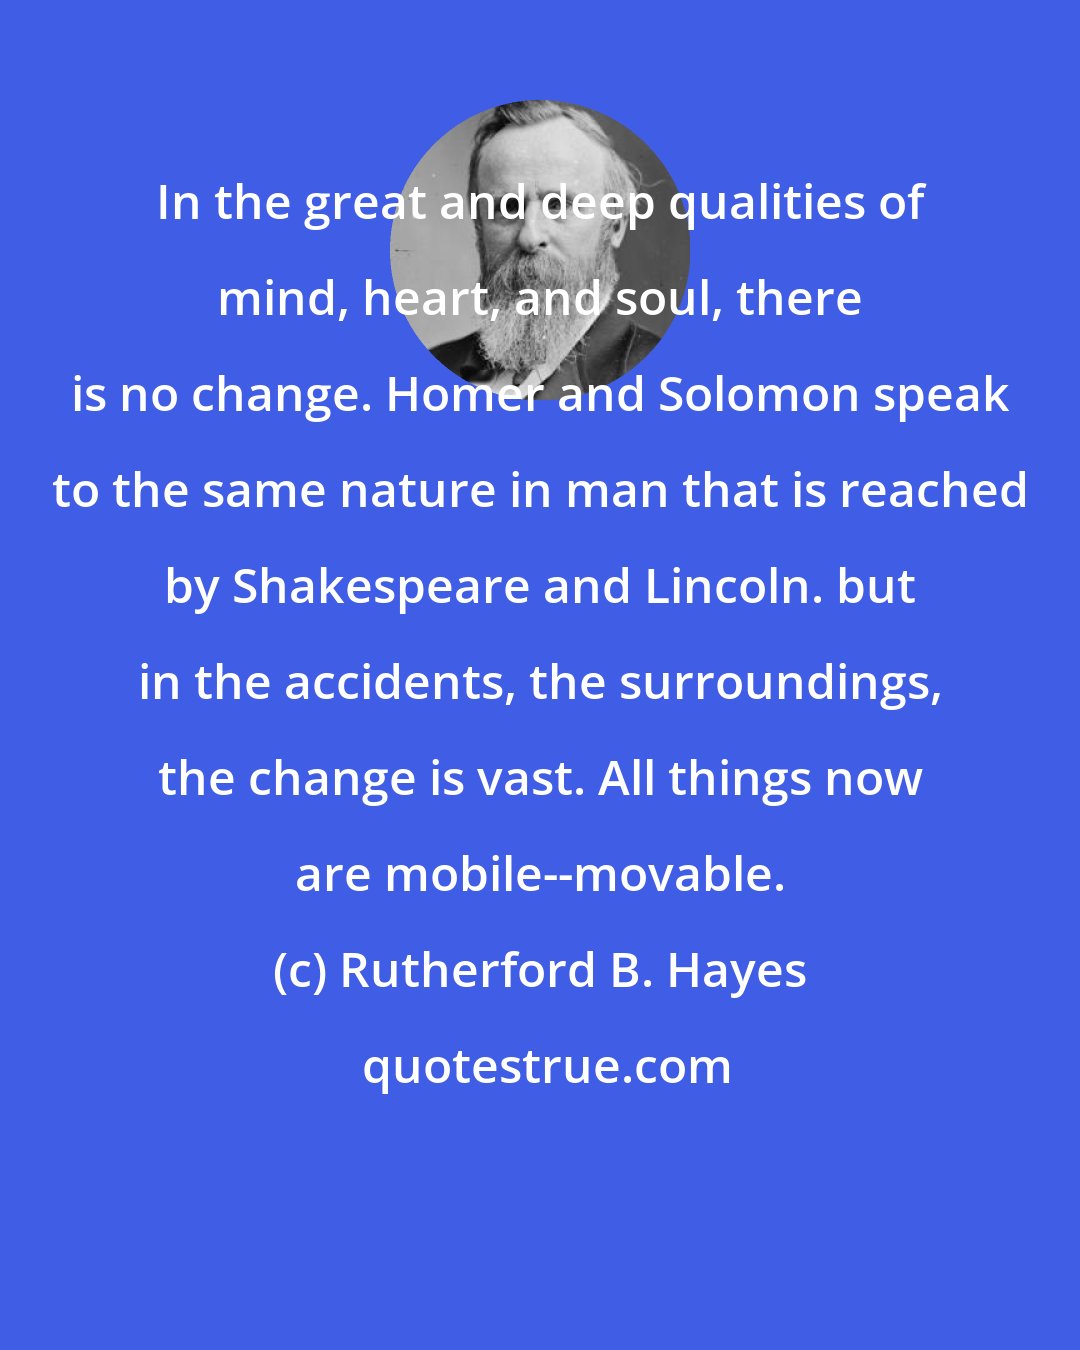 Rutherford B. Hayes: In the great and deep qualities of mind, heart, and soul, there is no change. Homer and Solomon speak to the same nature in man that is reached by Shakespeare and Lincoln. but in the accidents, the surroundings, the change is vast. All things now are mobile--movable.